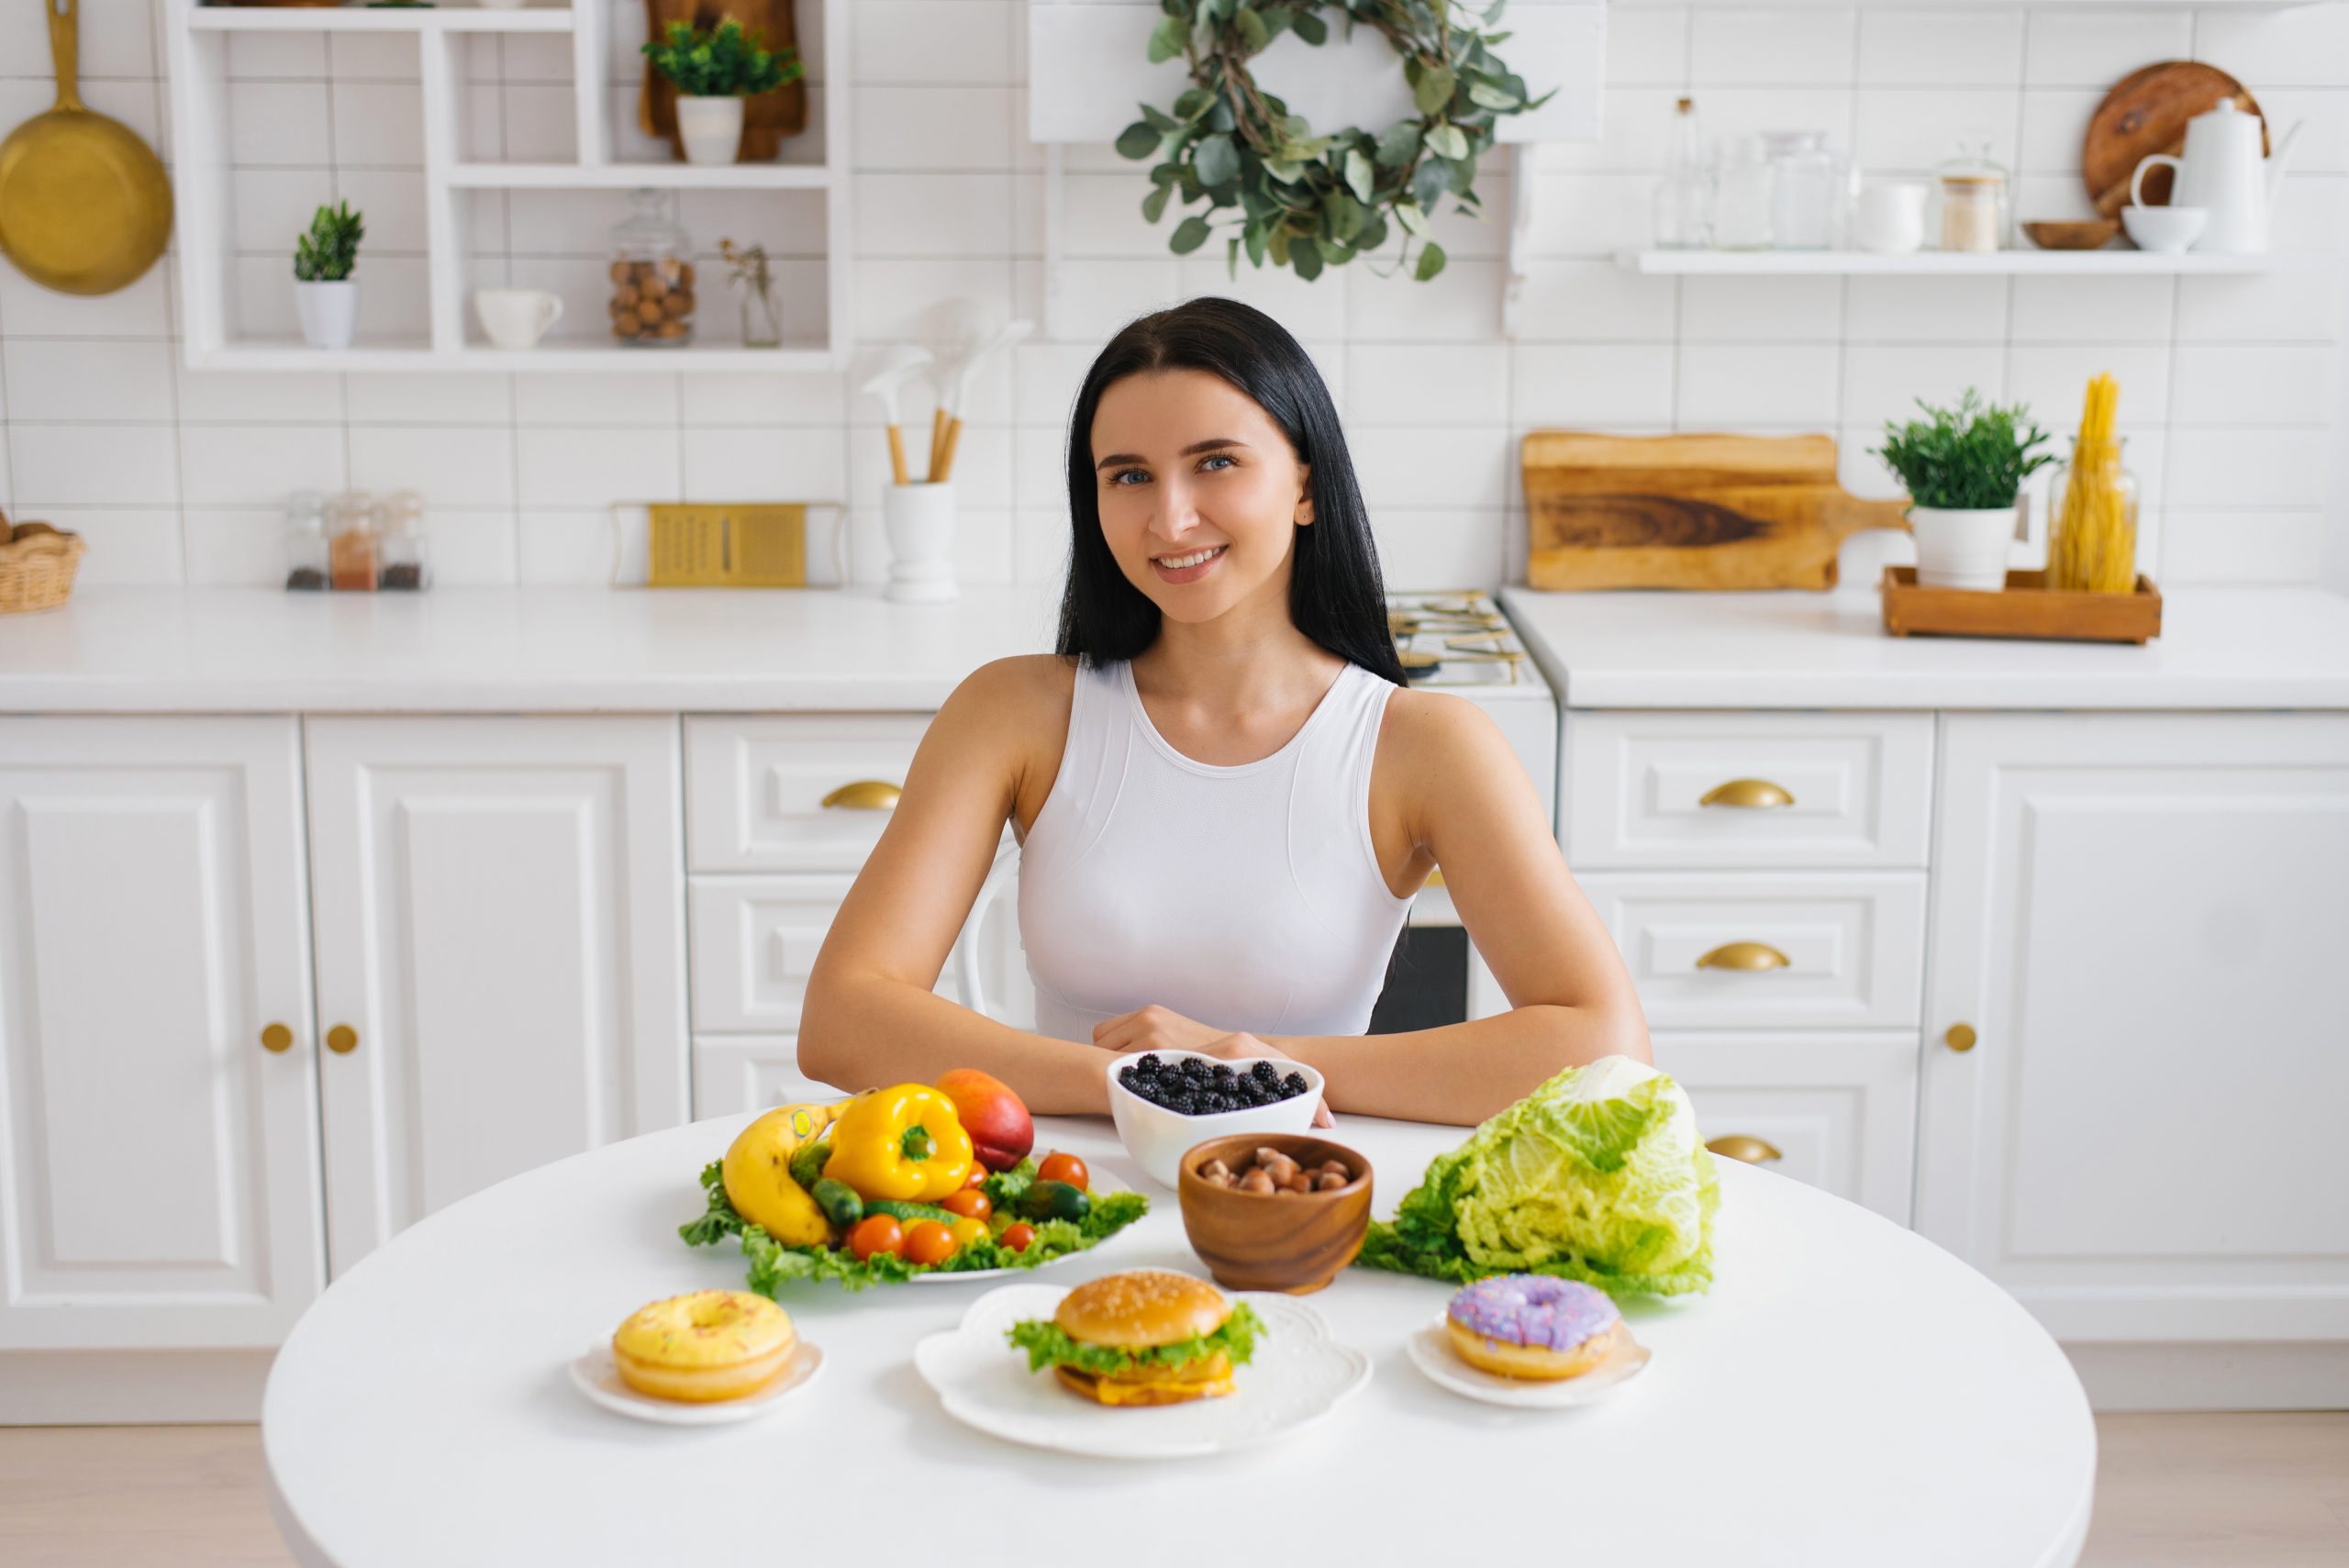 Happy healthy woman is sitting at a table with healthy food, fresh fruits and vegetables in the kitchen